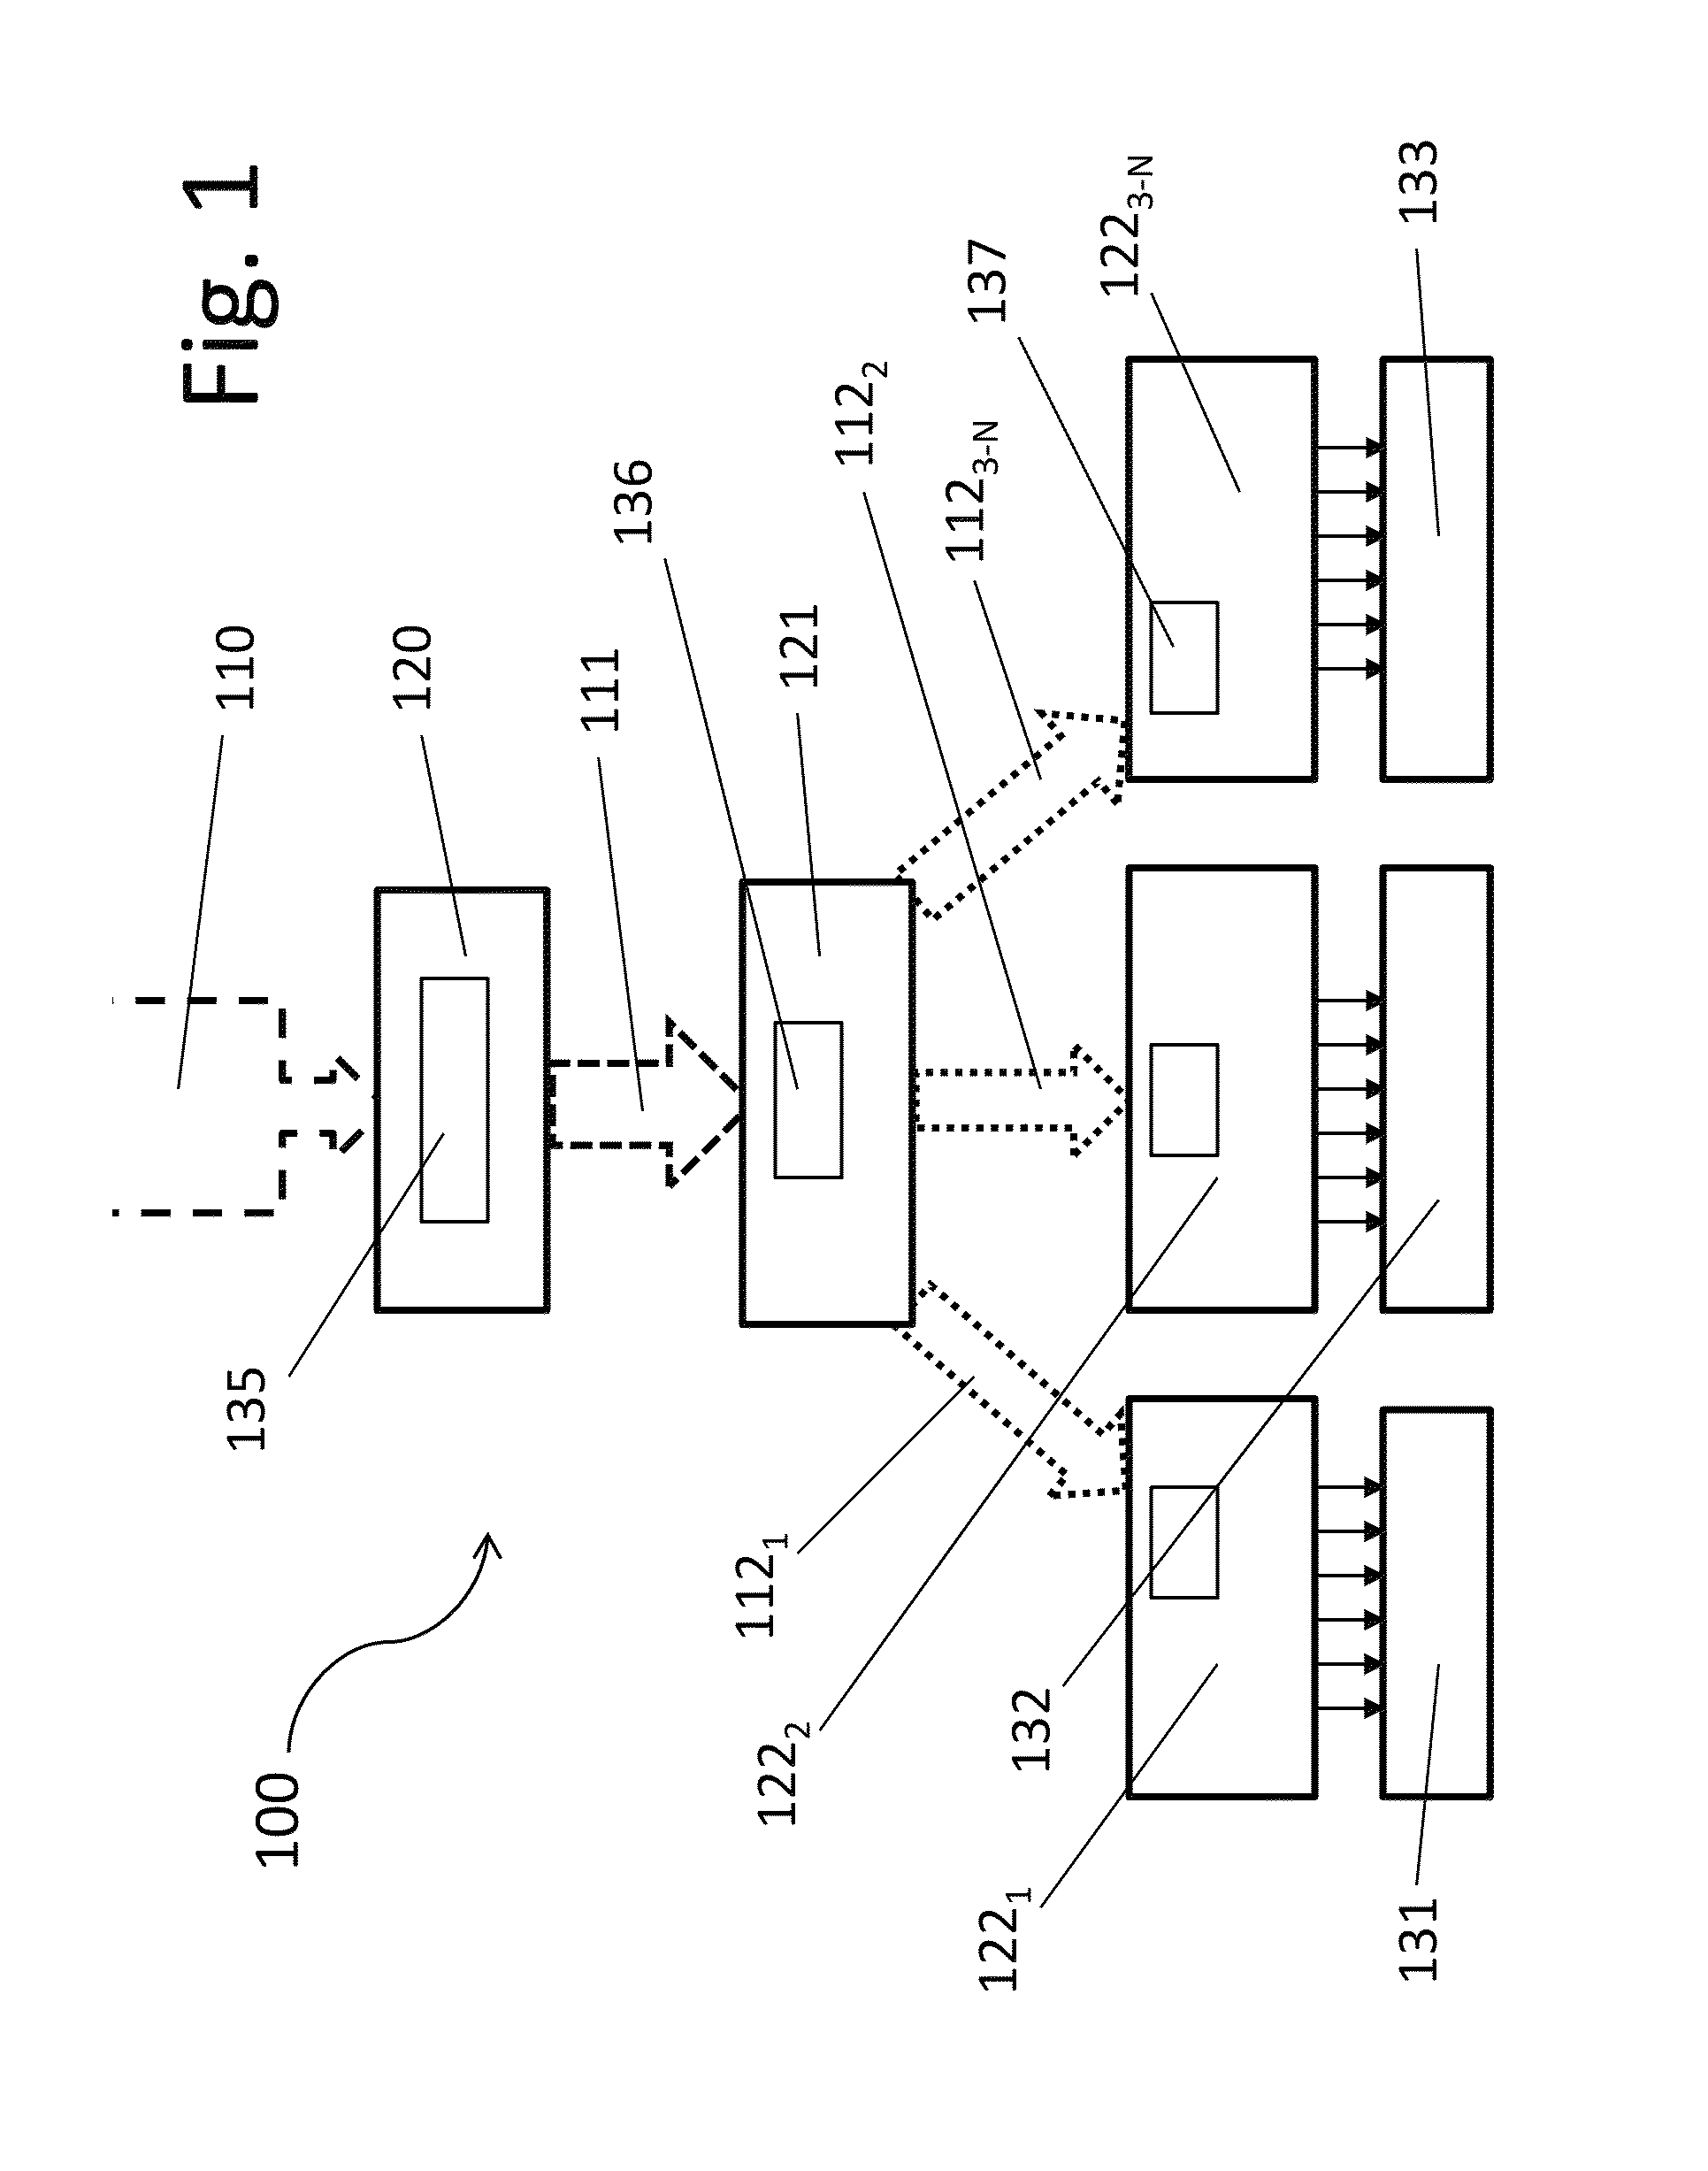 Resilient device authentication system with metadata binding